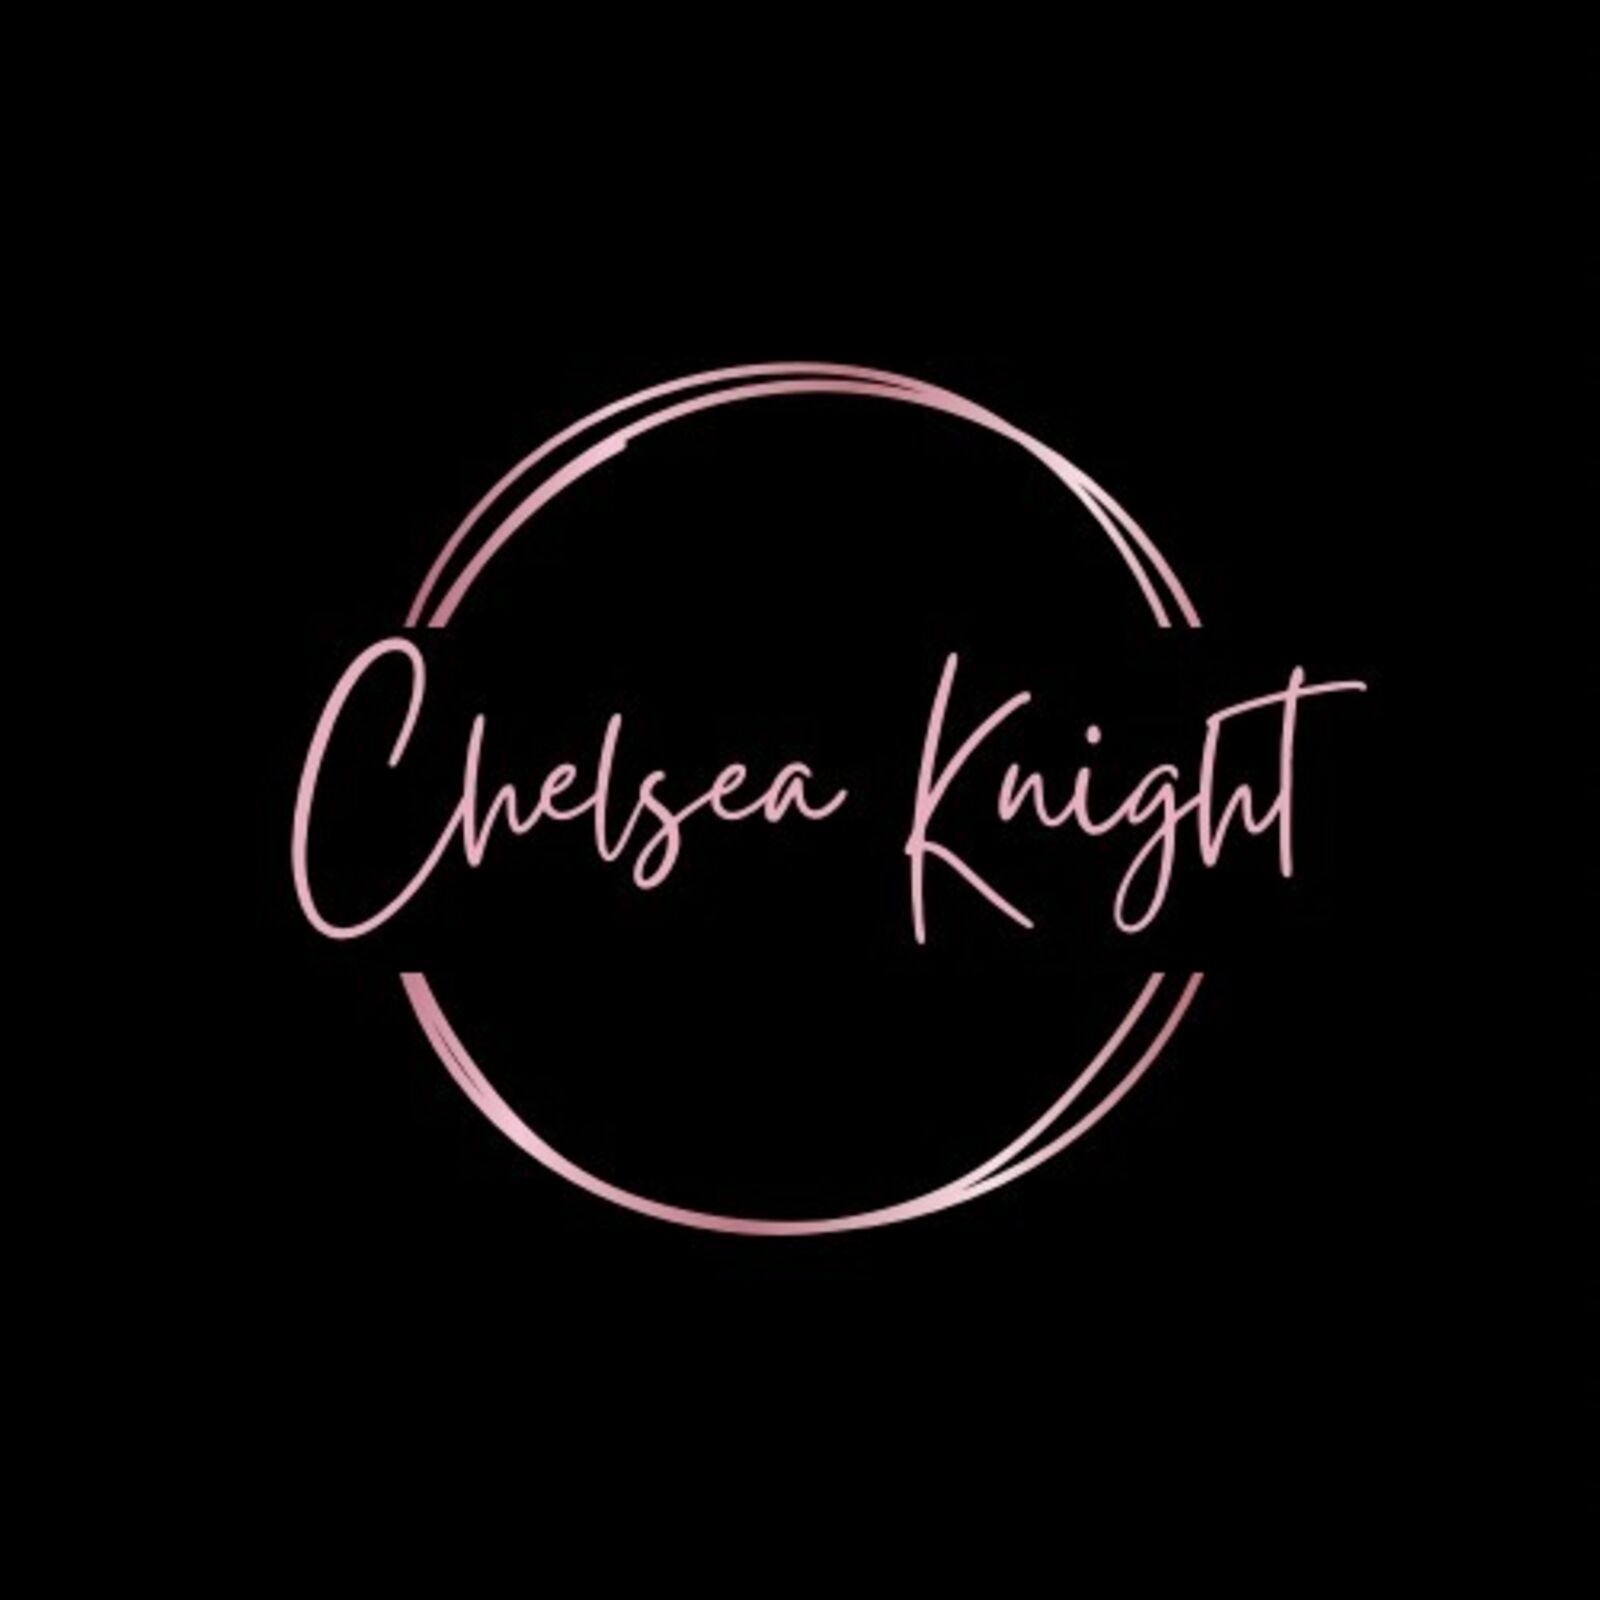 See Chelsea_Knight_ profile